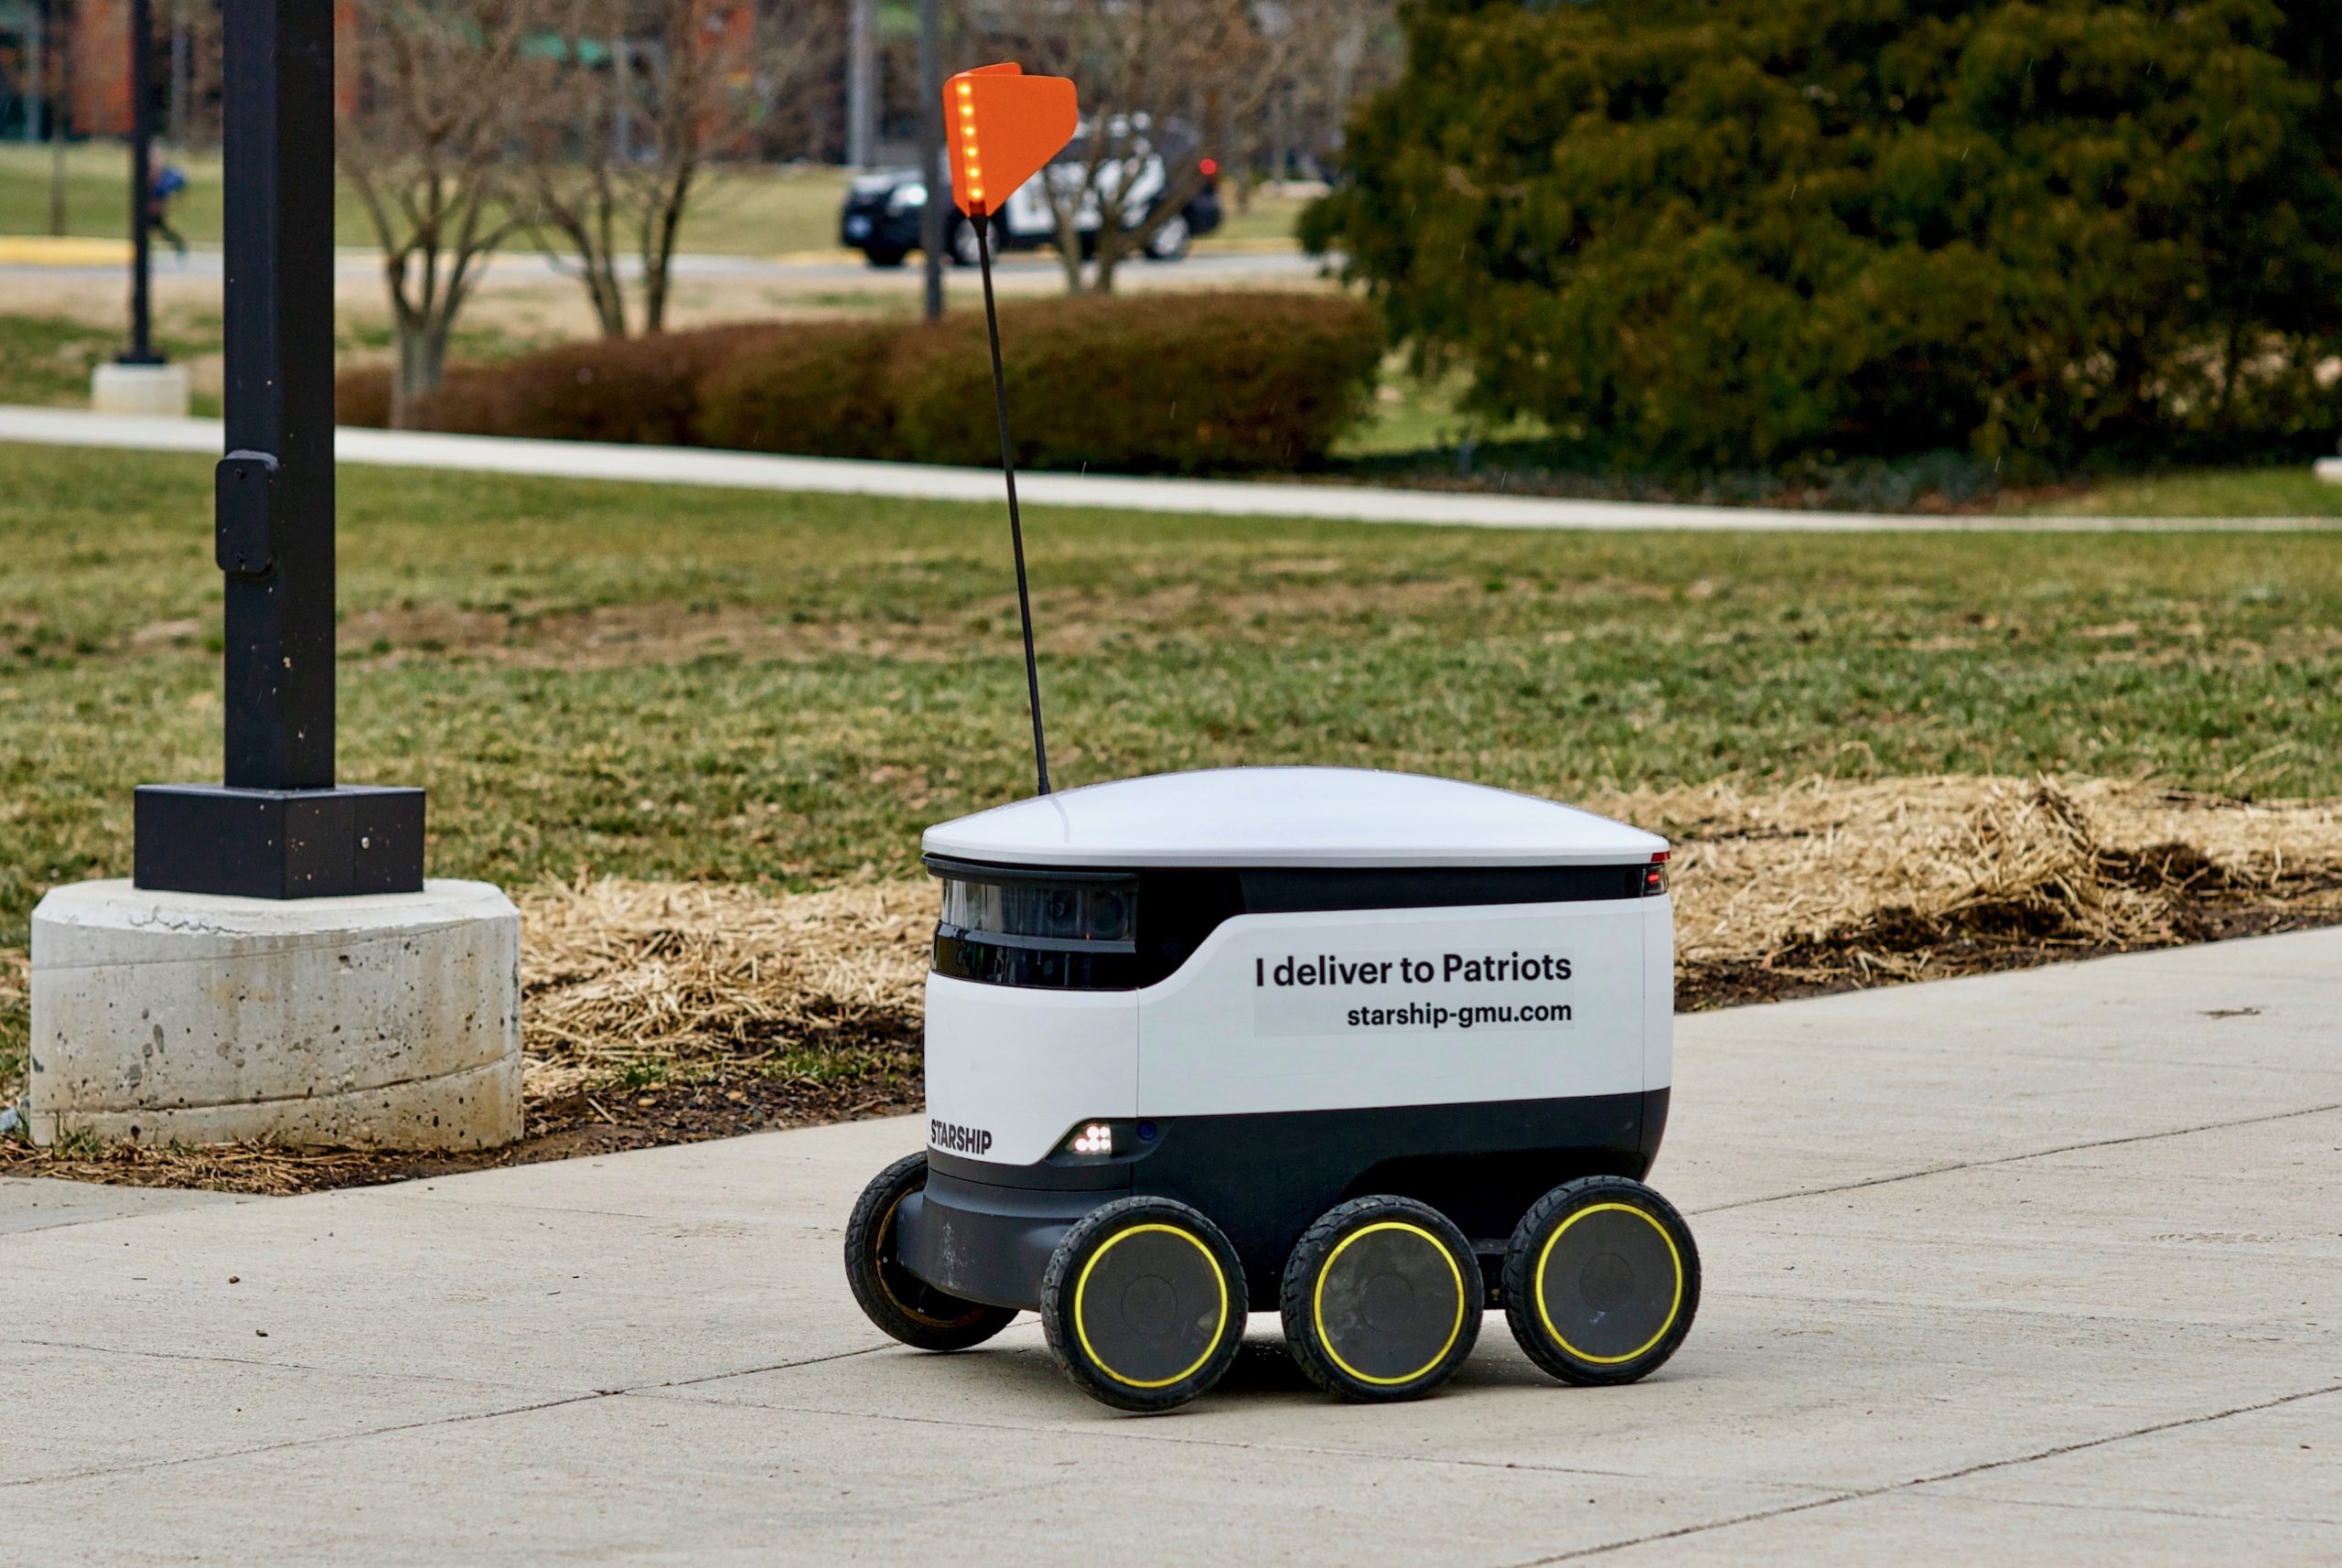 Robotic delivery device on a sidewalk